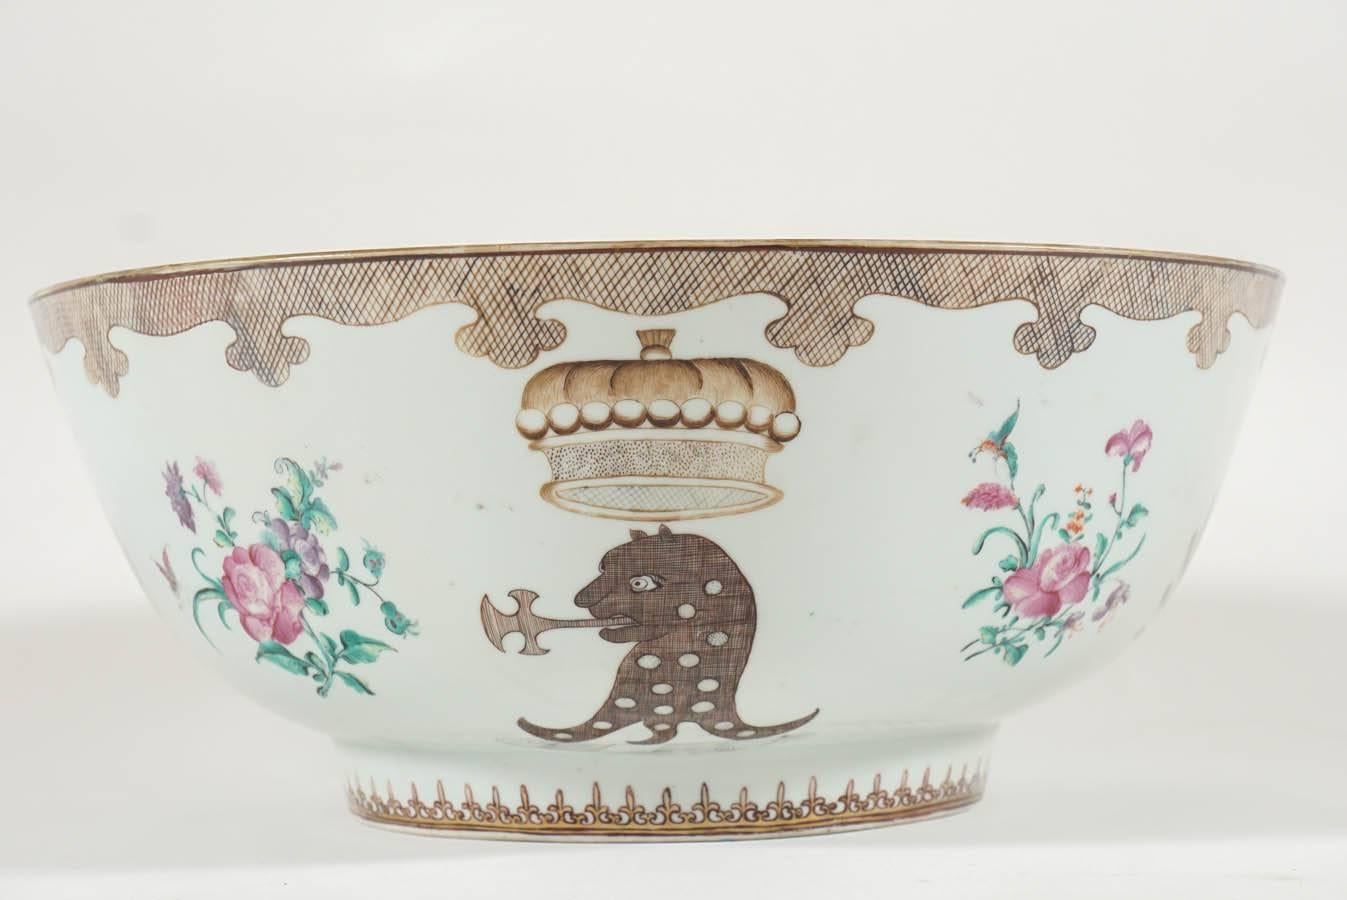 The Pleydell-Bouverie Family Punch Bowl, Chinese Export, circa 1750 2